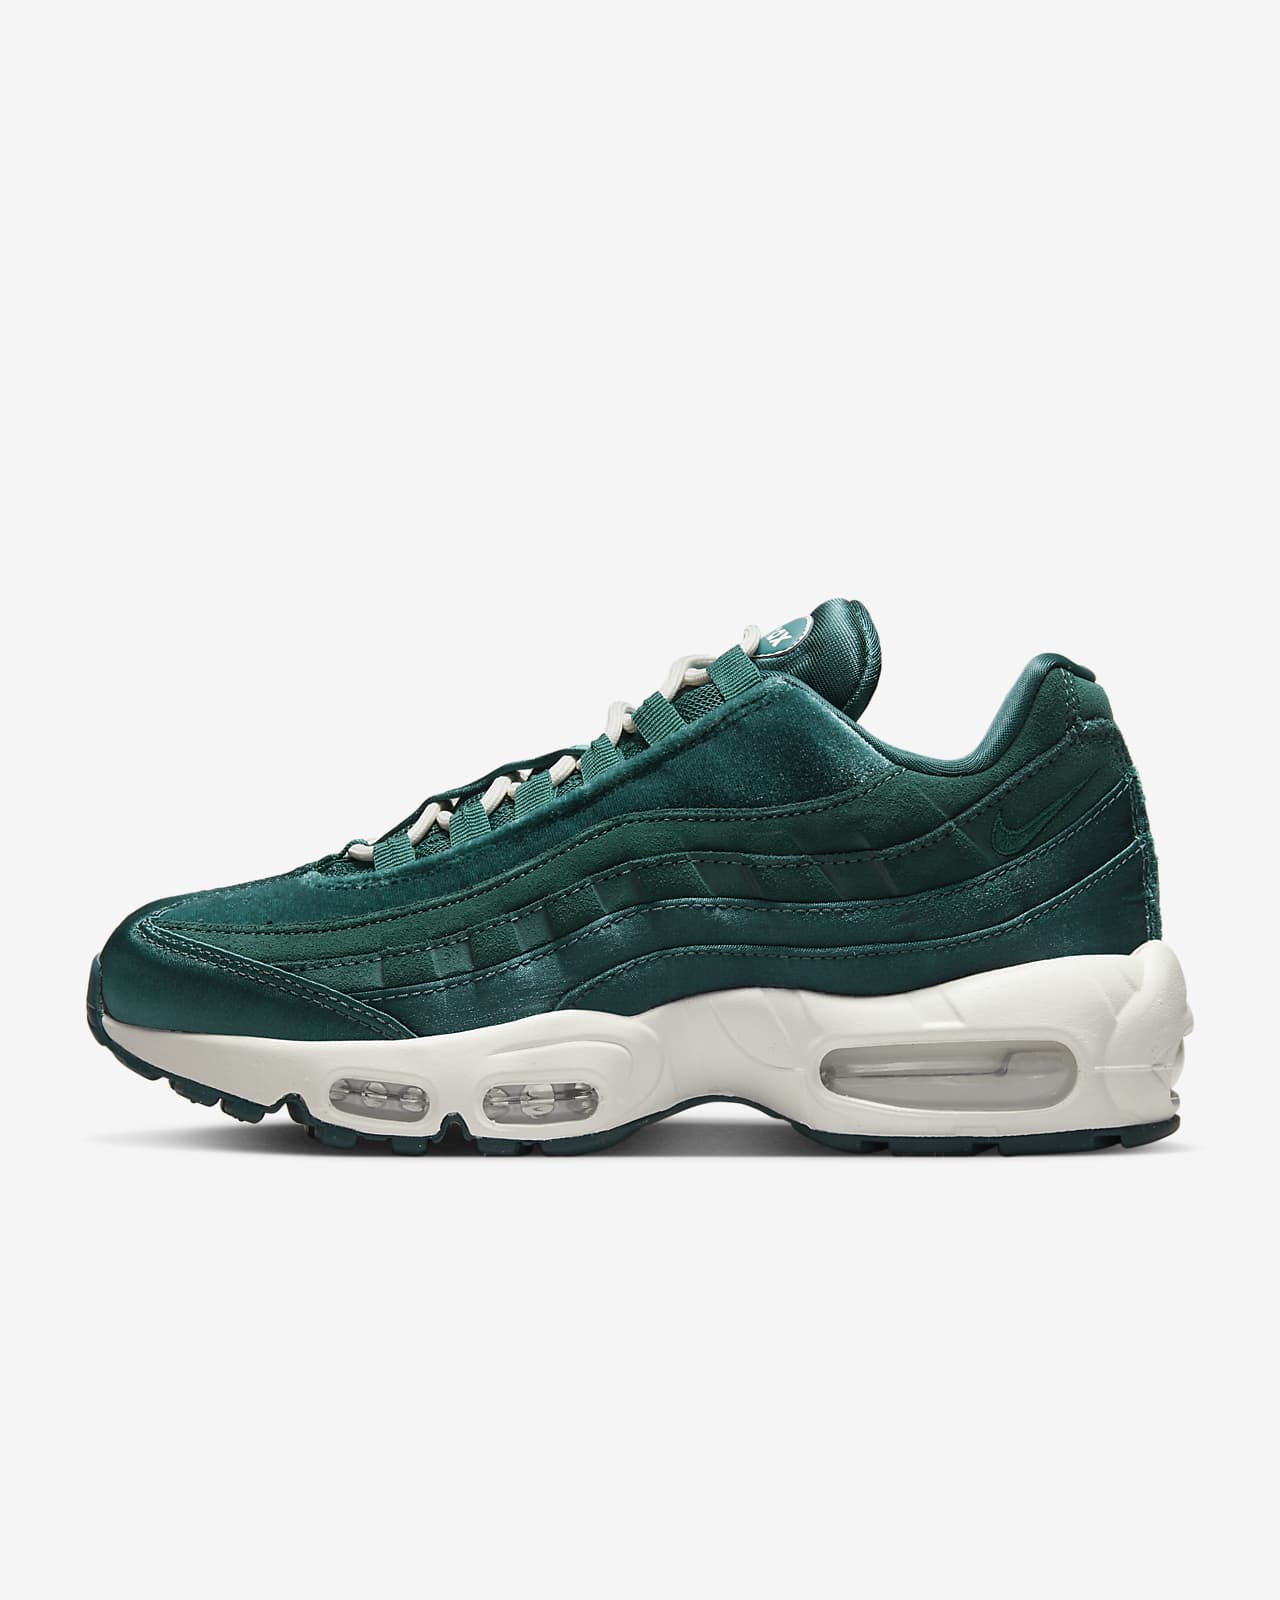 Nike Air Max 95 Womens Shoes Review